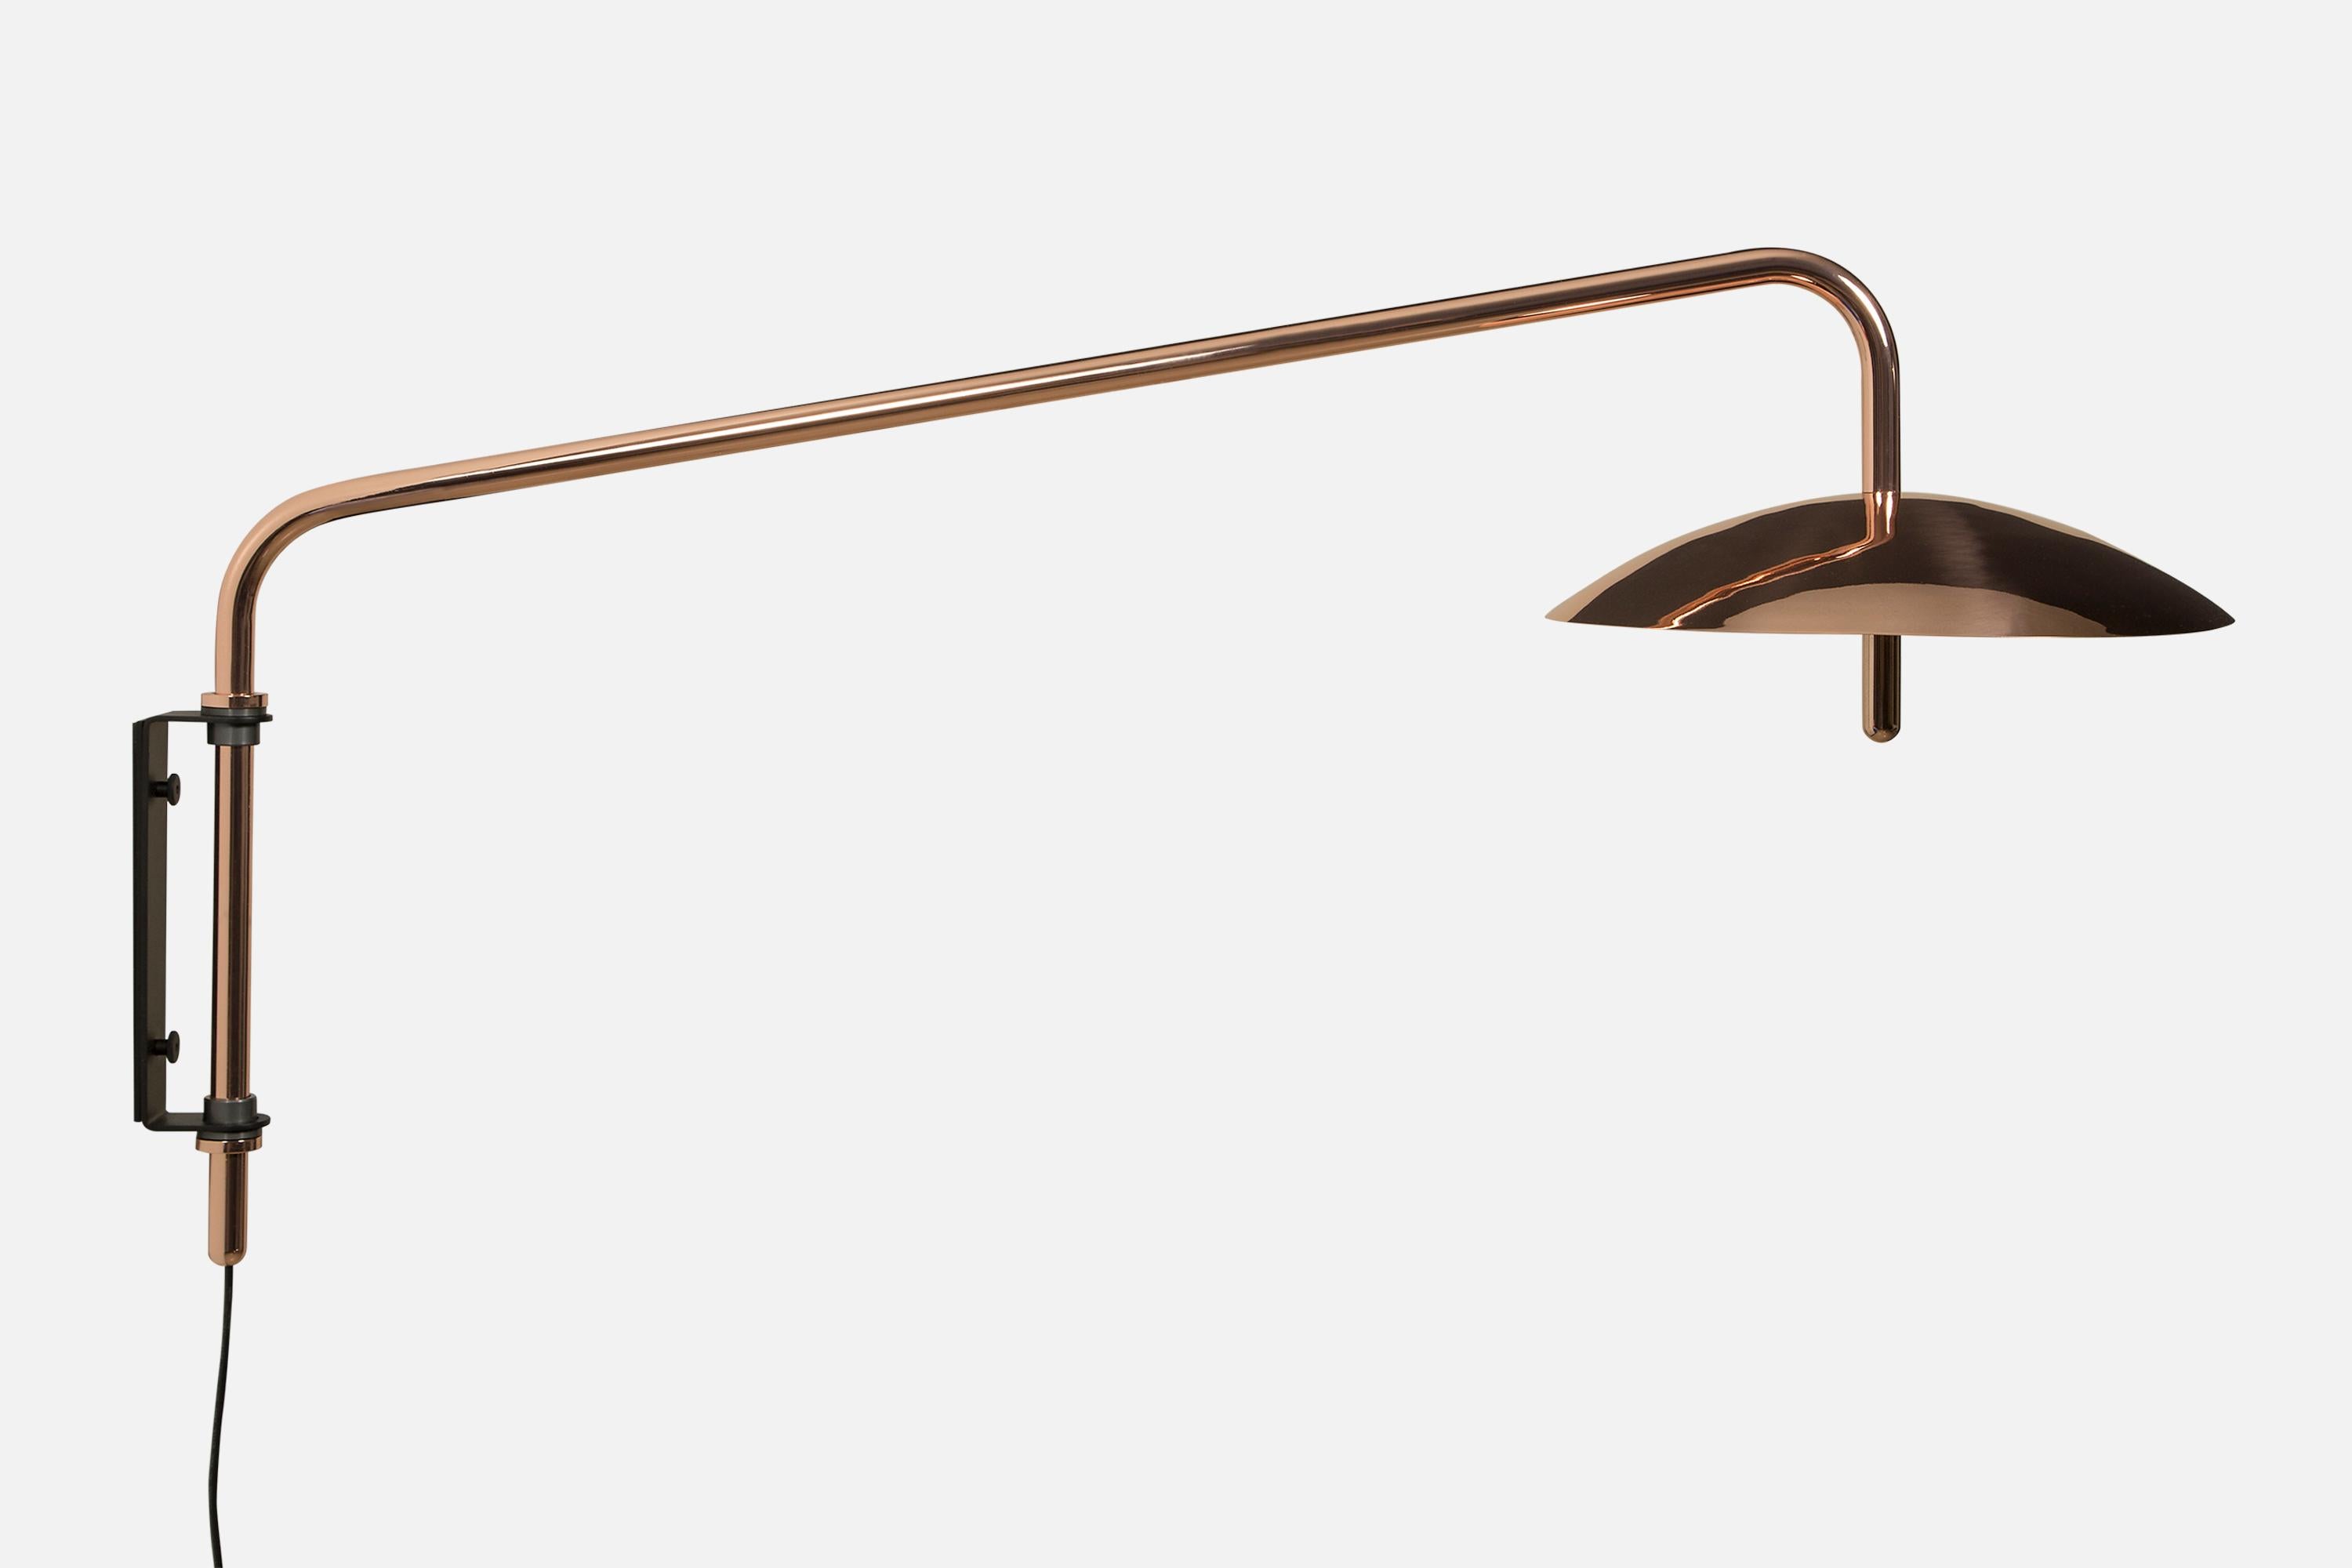 Contemporary Signal Arm Sconce in White X Copper, Long, by Souda, Made to Order For Sale